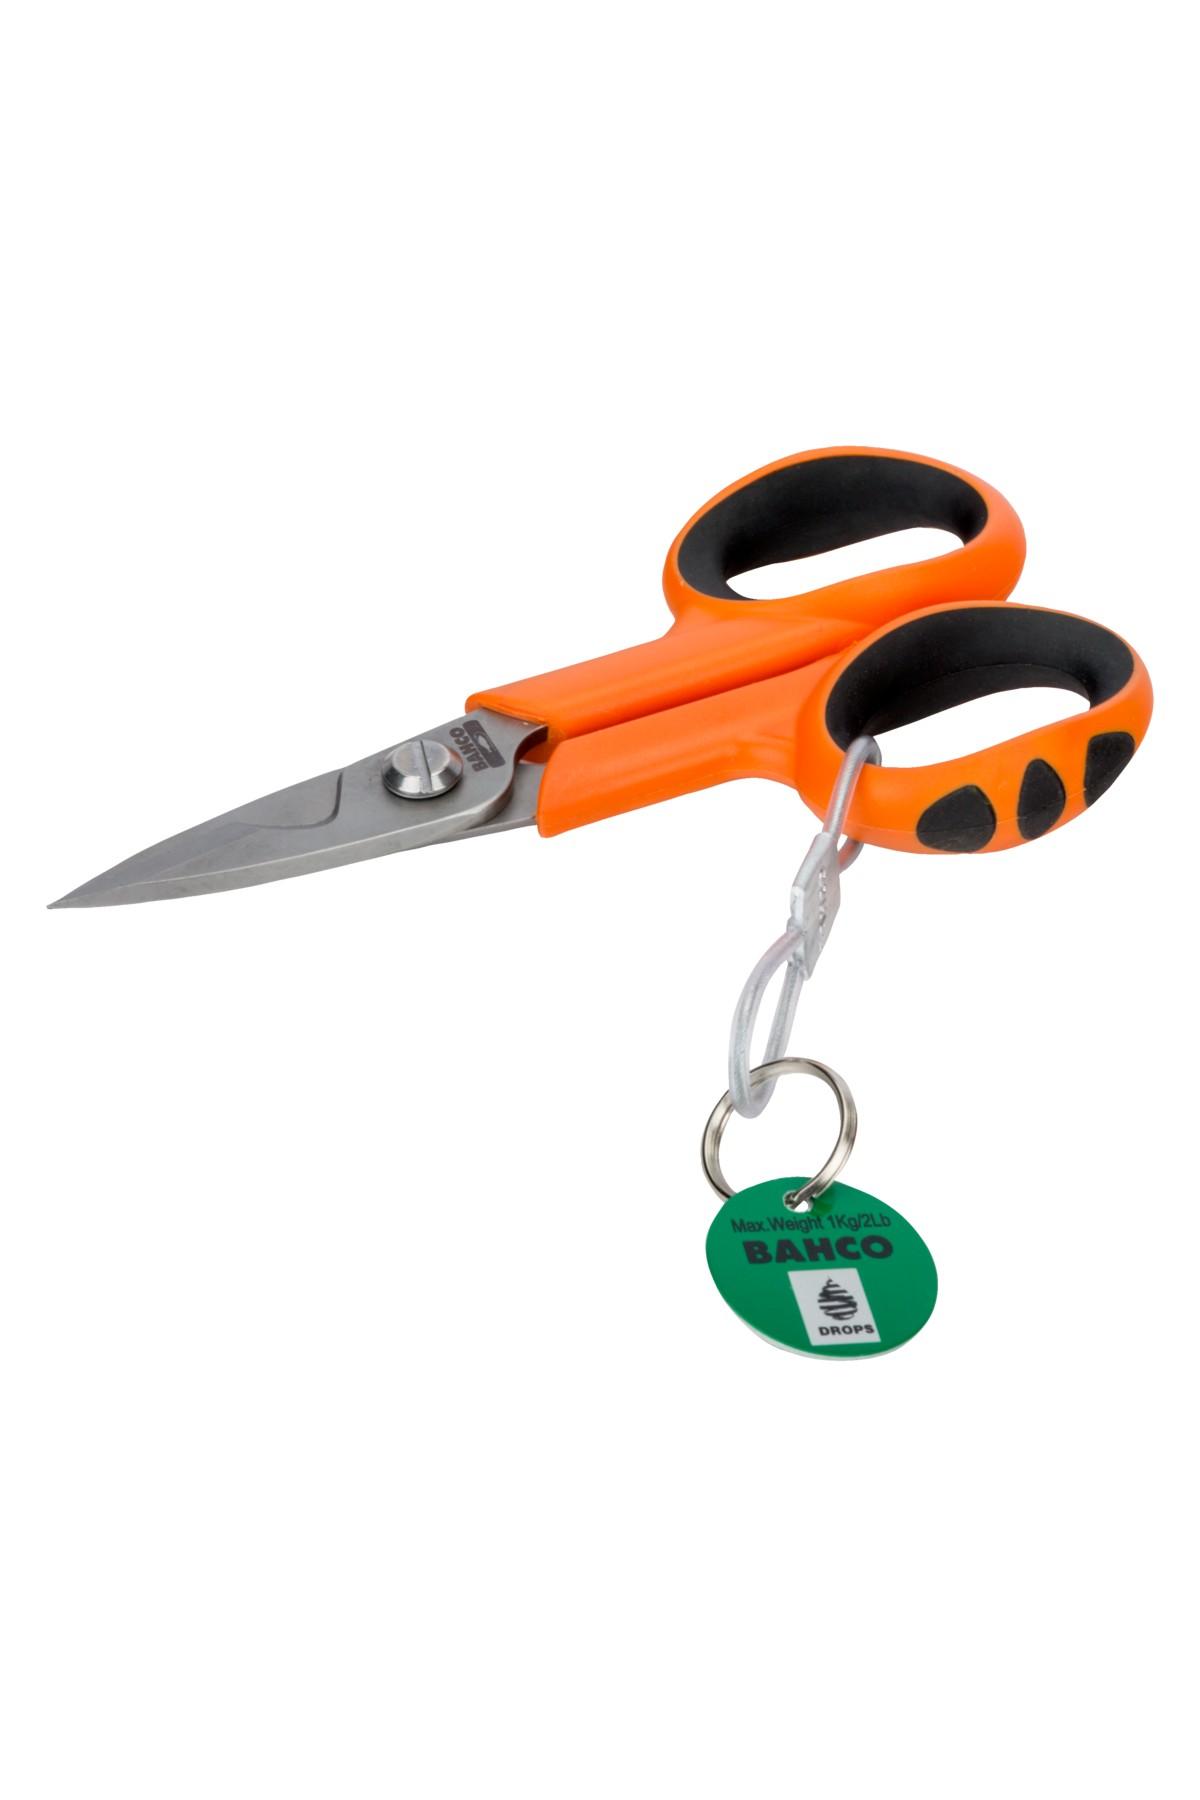 Heavy Duty Electrician's Shears with Safety Cord